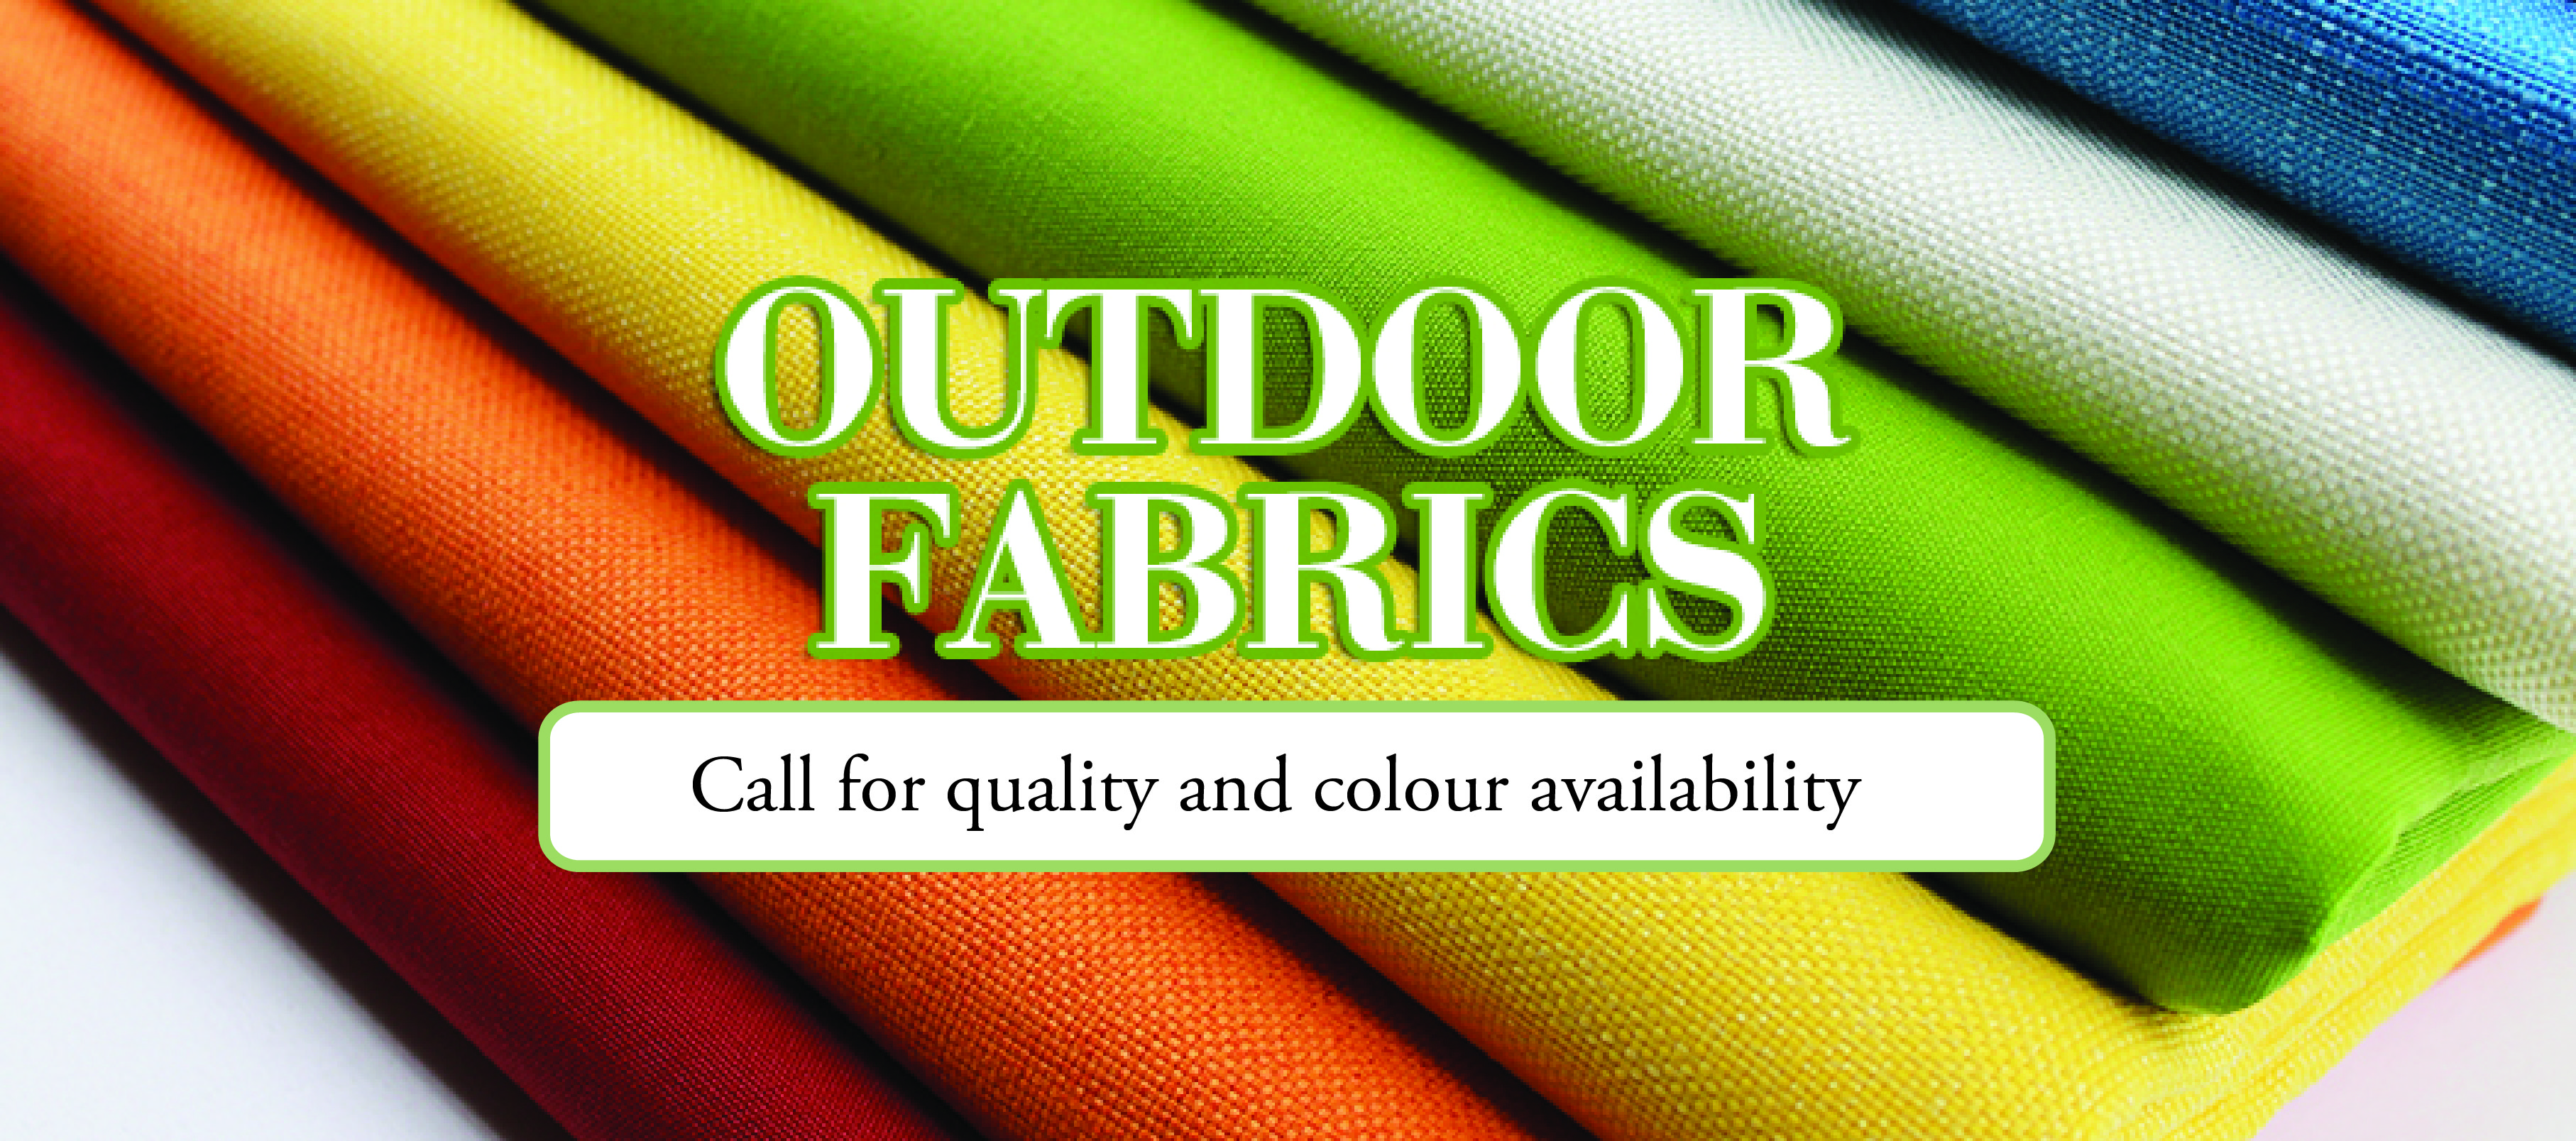 Outdoor Fabrics, Call for quality and colour availability